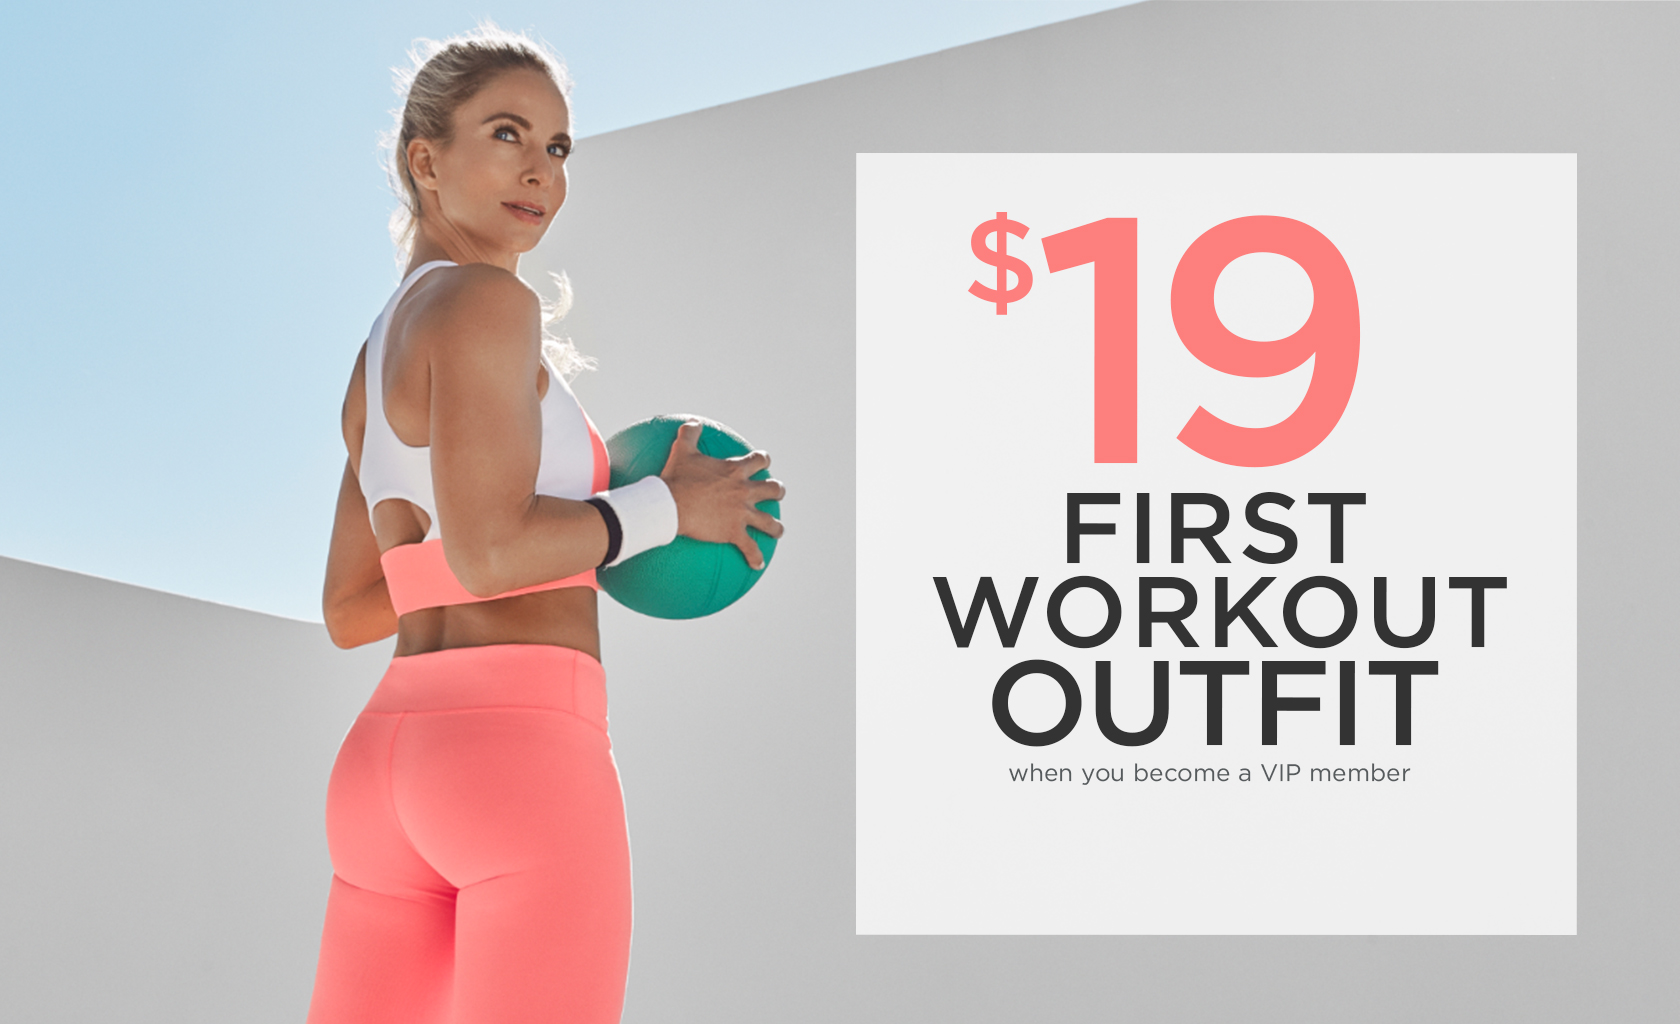 $19 First Workout Outfit